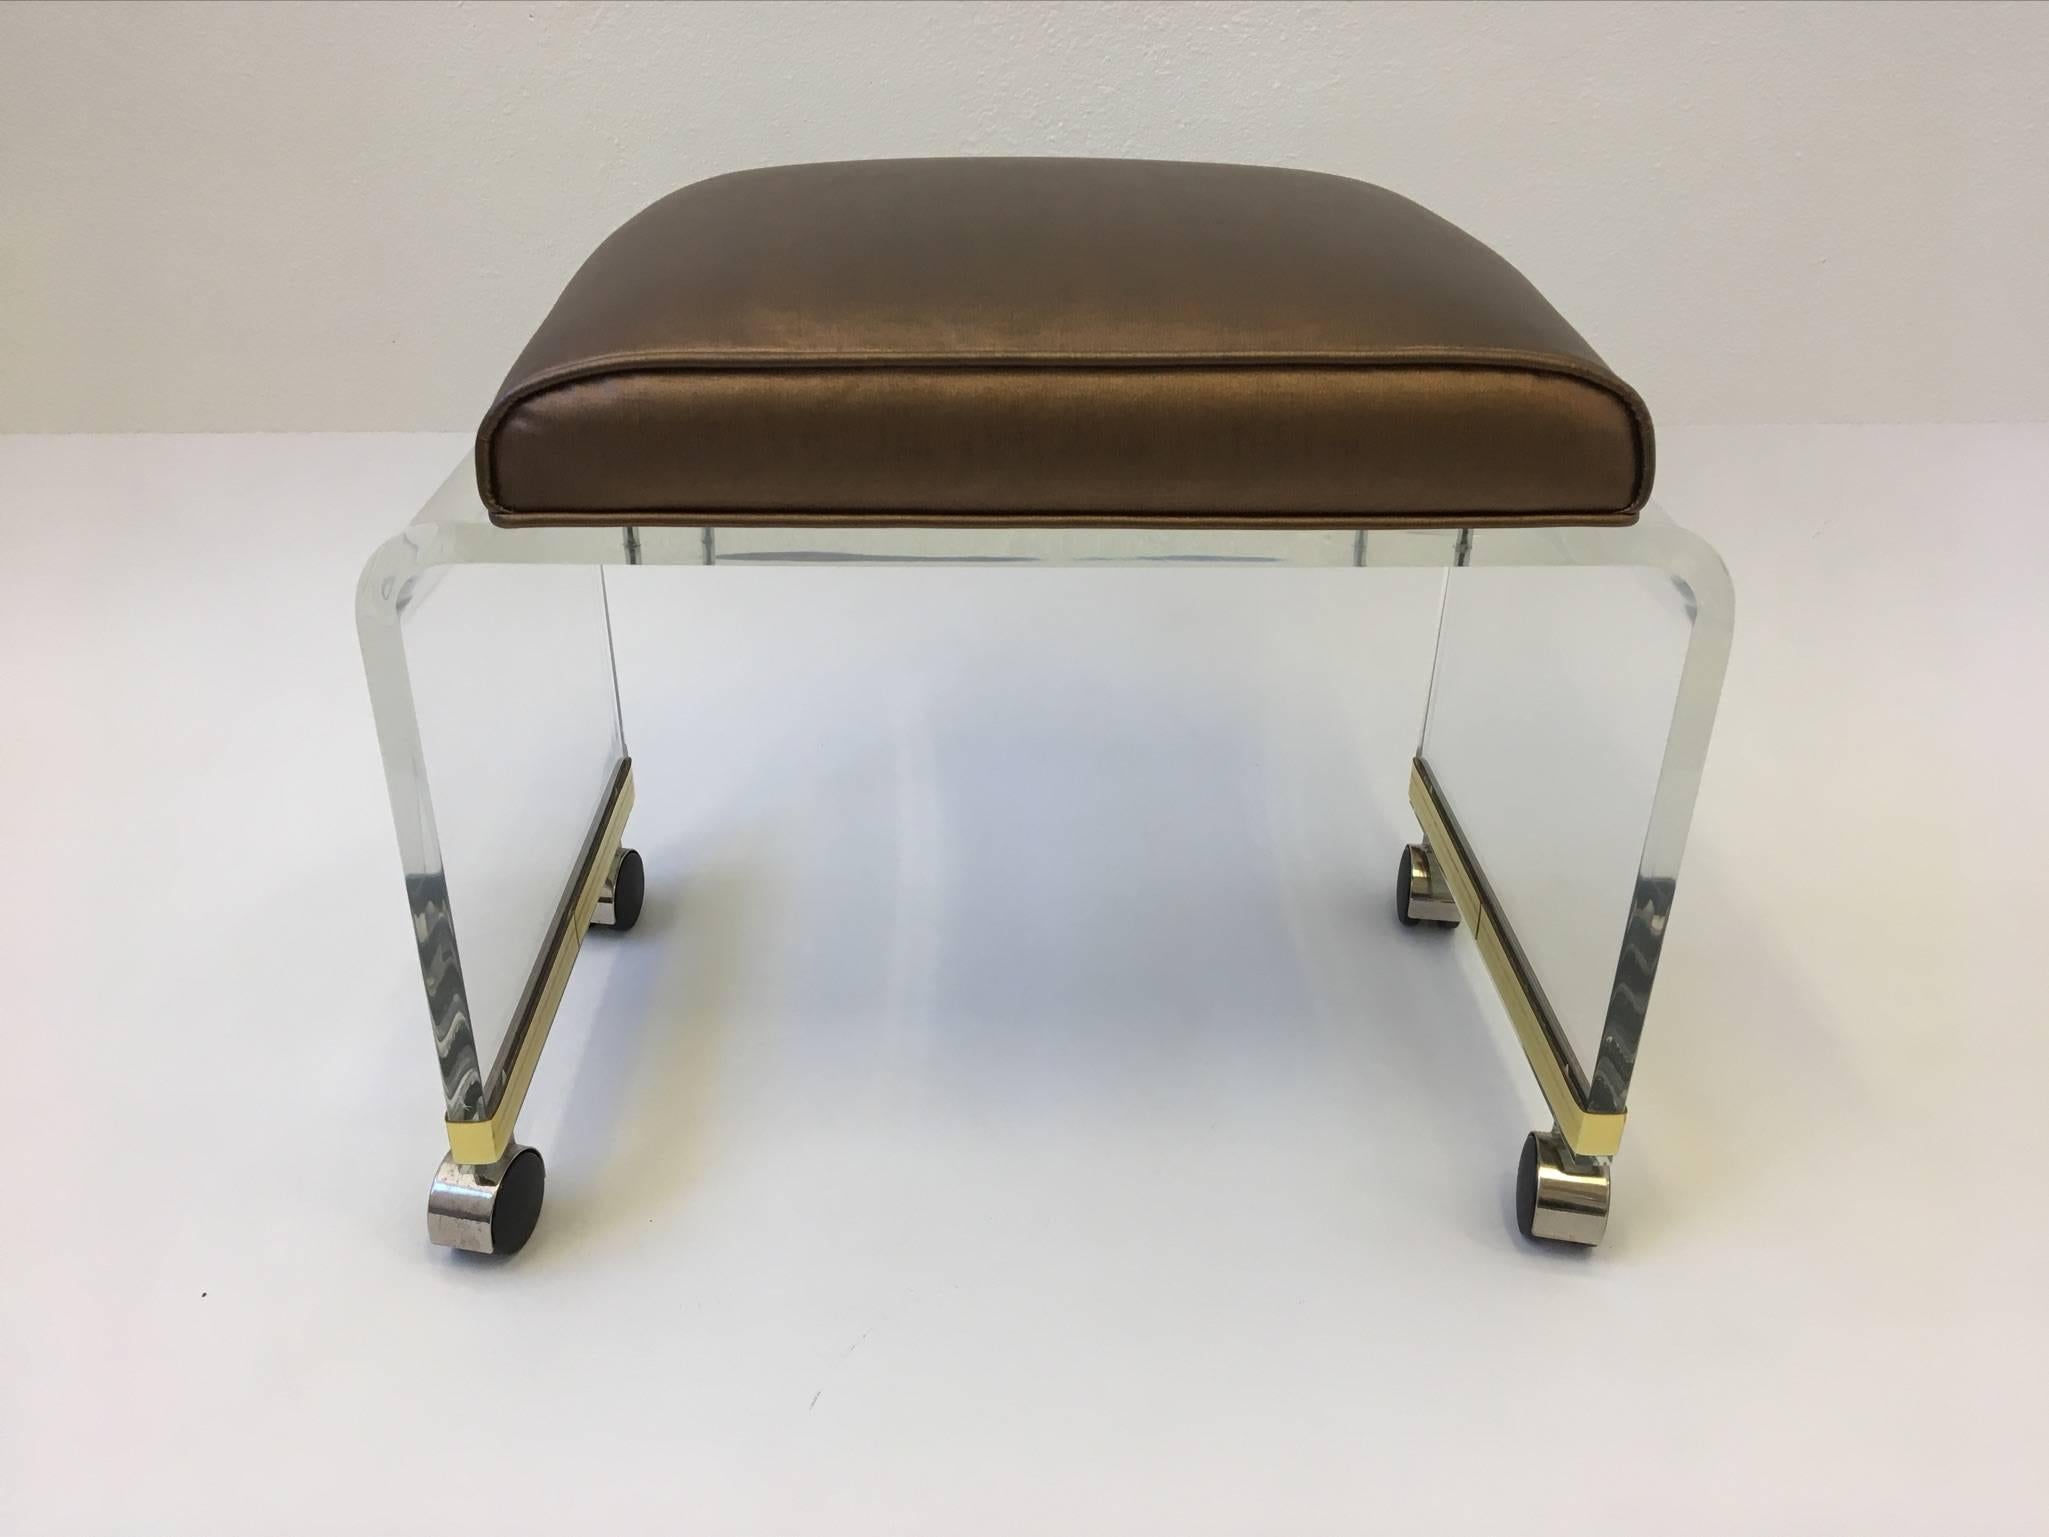 A glamorous 1980s thick acrylic waterfall vanity stool by Hill Manufacturing Corp. This is from the 1980s. The acrylic has been professionally polished and newly reupholstered with a copper color high quality vinyl. 

Dimensions: 21.5